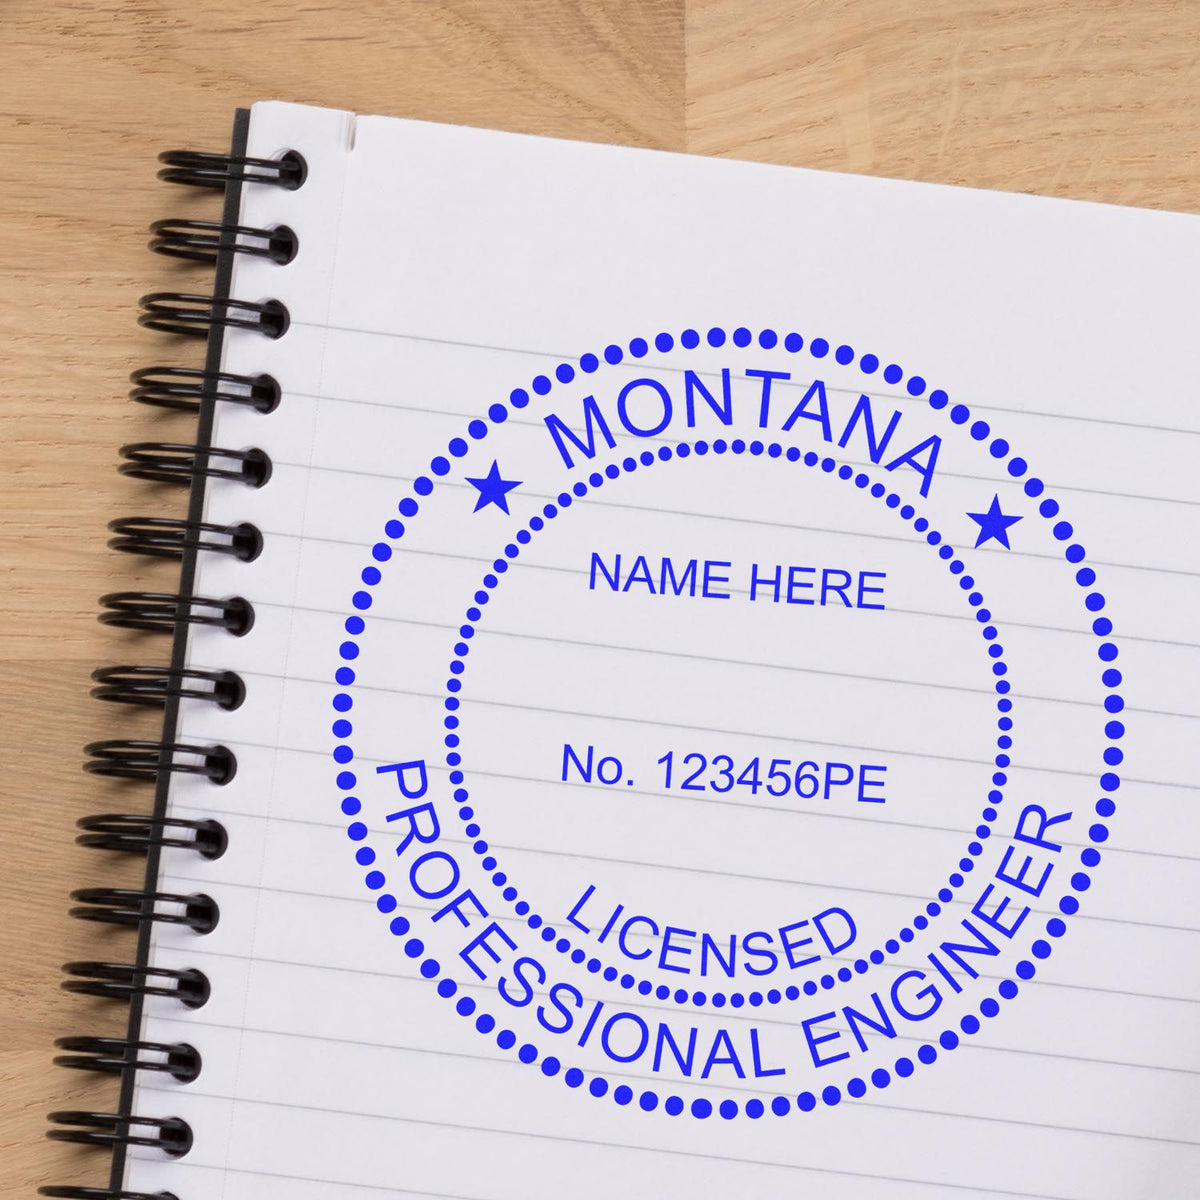 The Slim Pre-Inked Montana Professional Engineer Seal Stamp stamp impression comes to life with a crisp, detailed photo on paper - showcasing true professional quality.